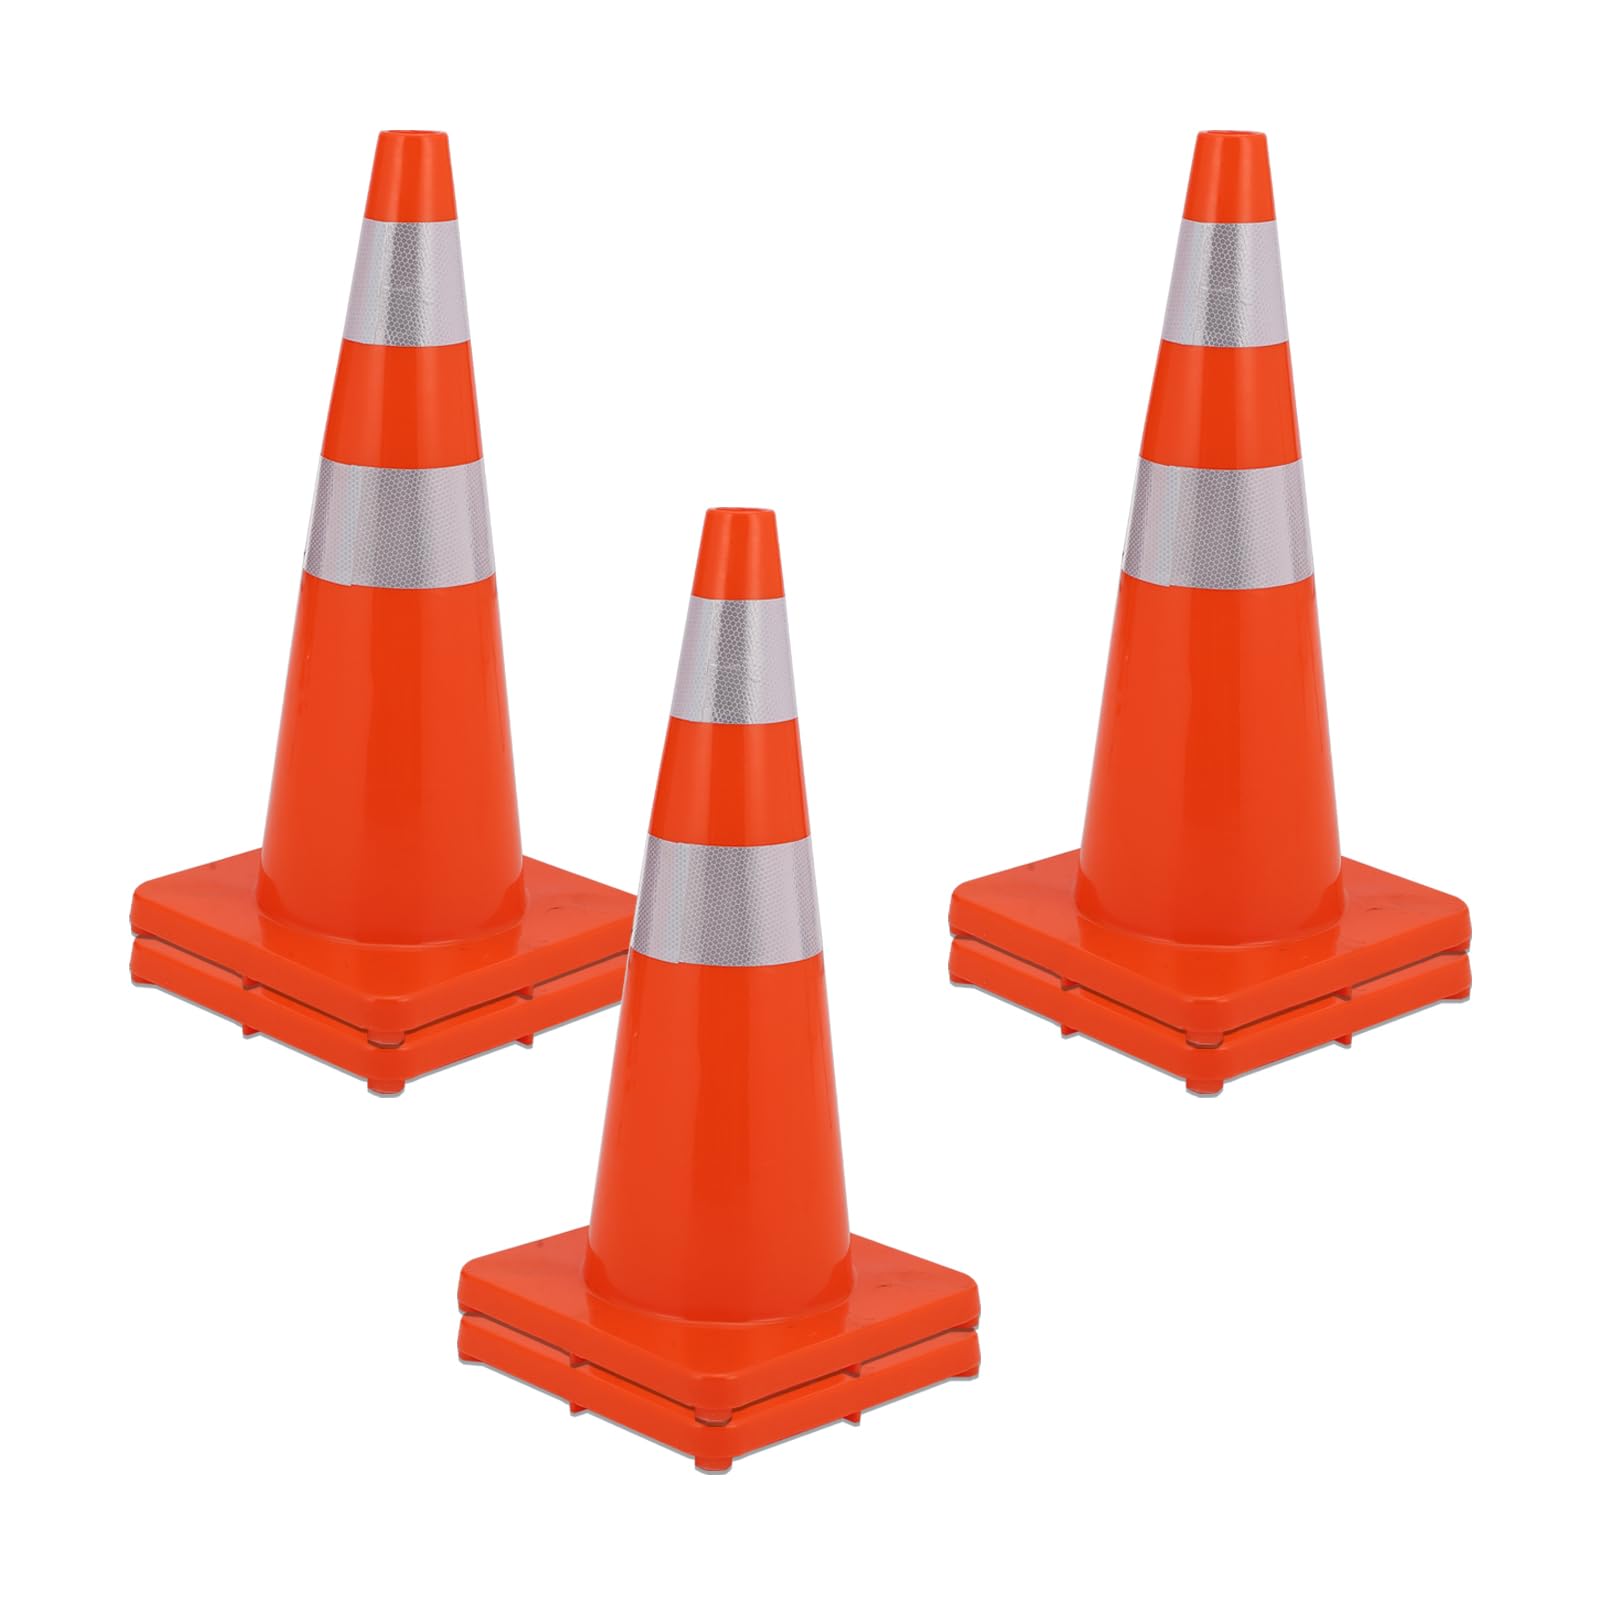 Traffic Cones , PVC Safty Cones with reflective tape, Orange Cones for Parking, Construction, Training, Sports, Caution, Road Cones